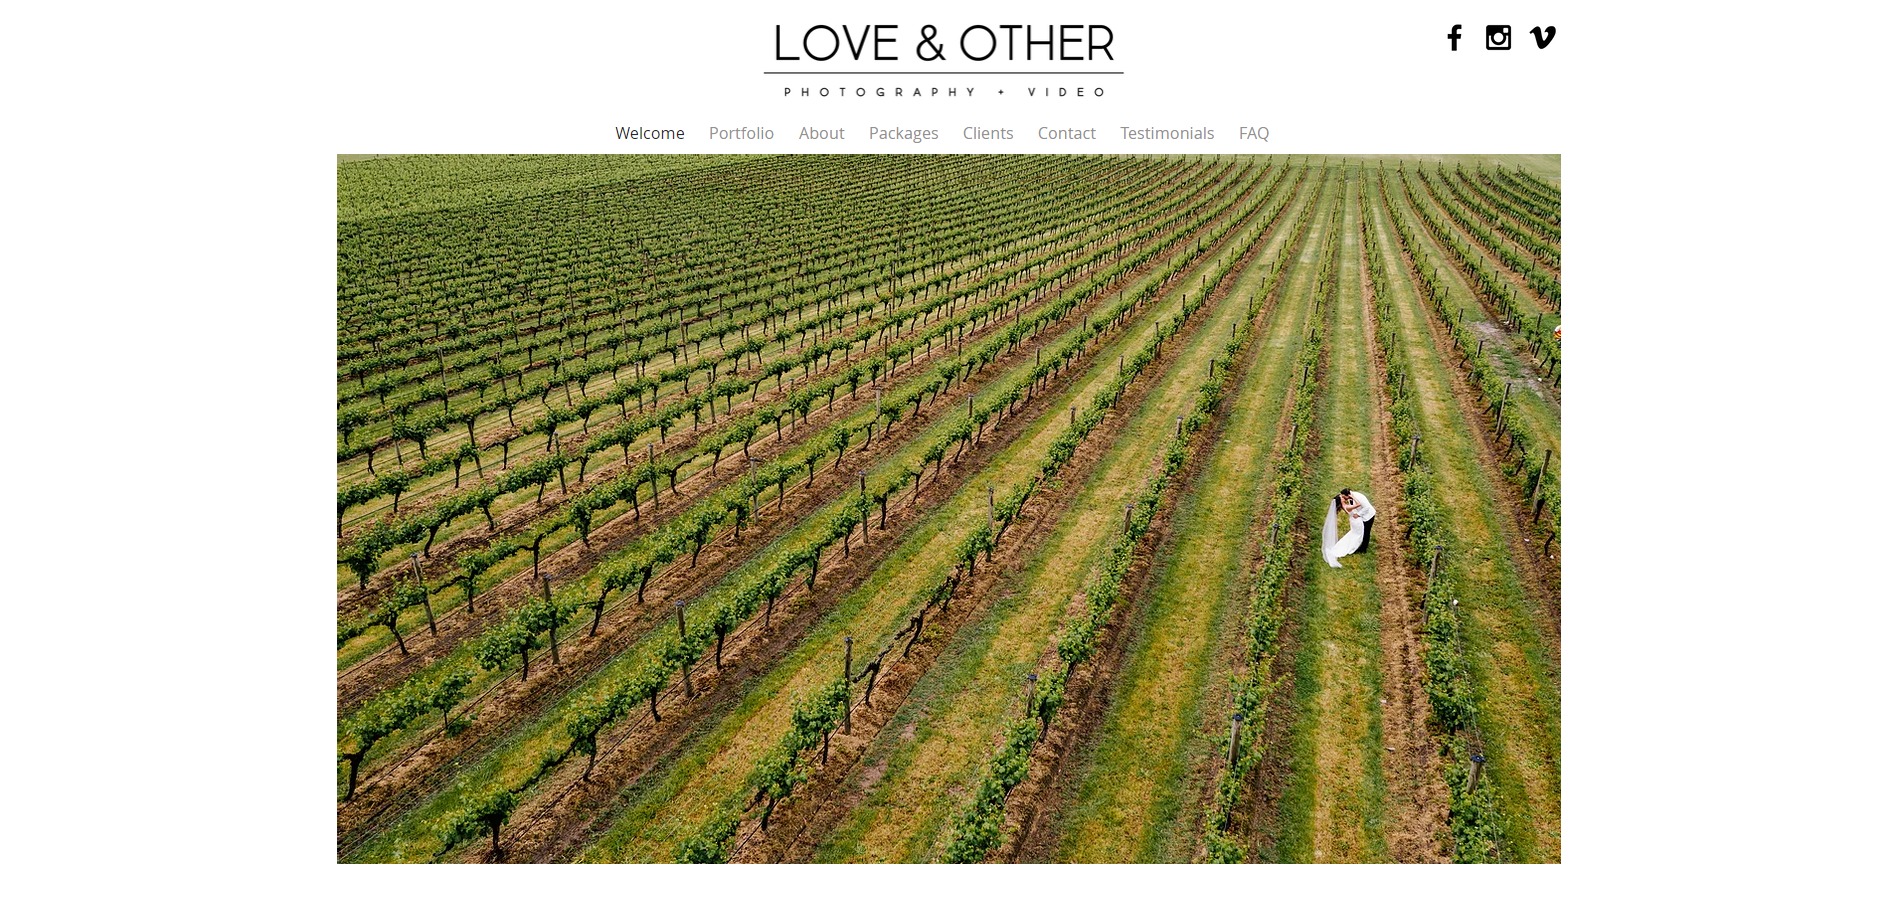 Love & Other Wedding Photography